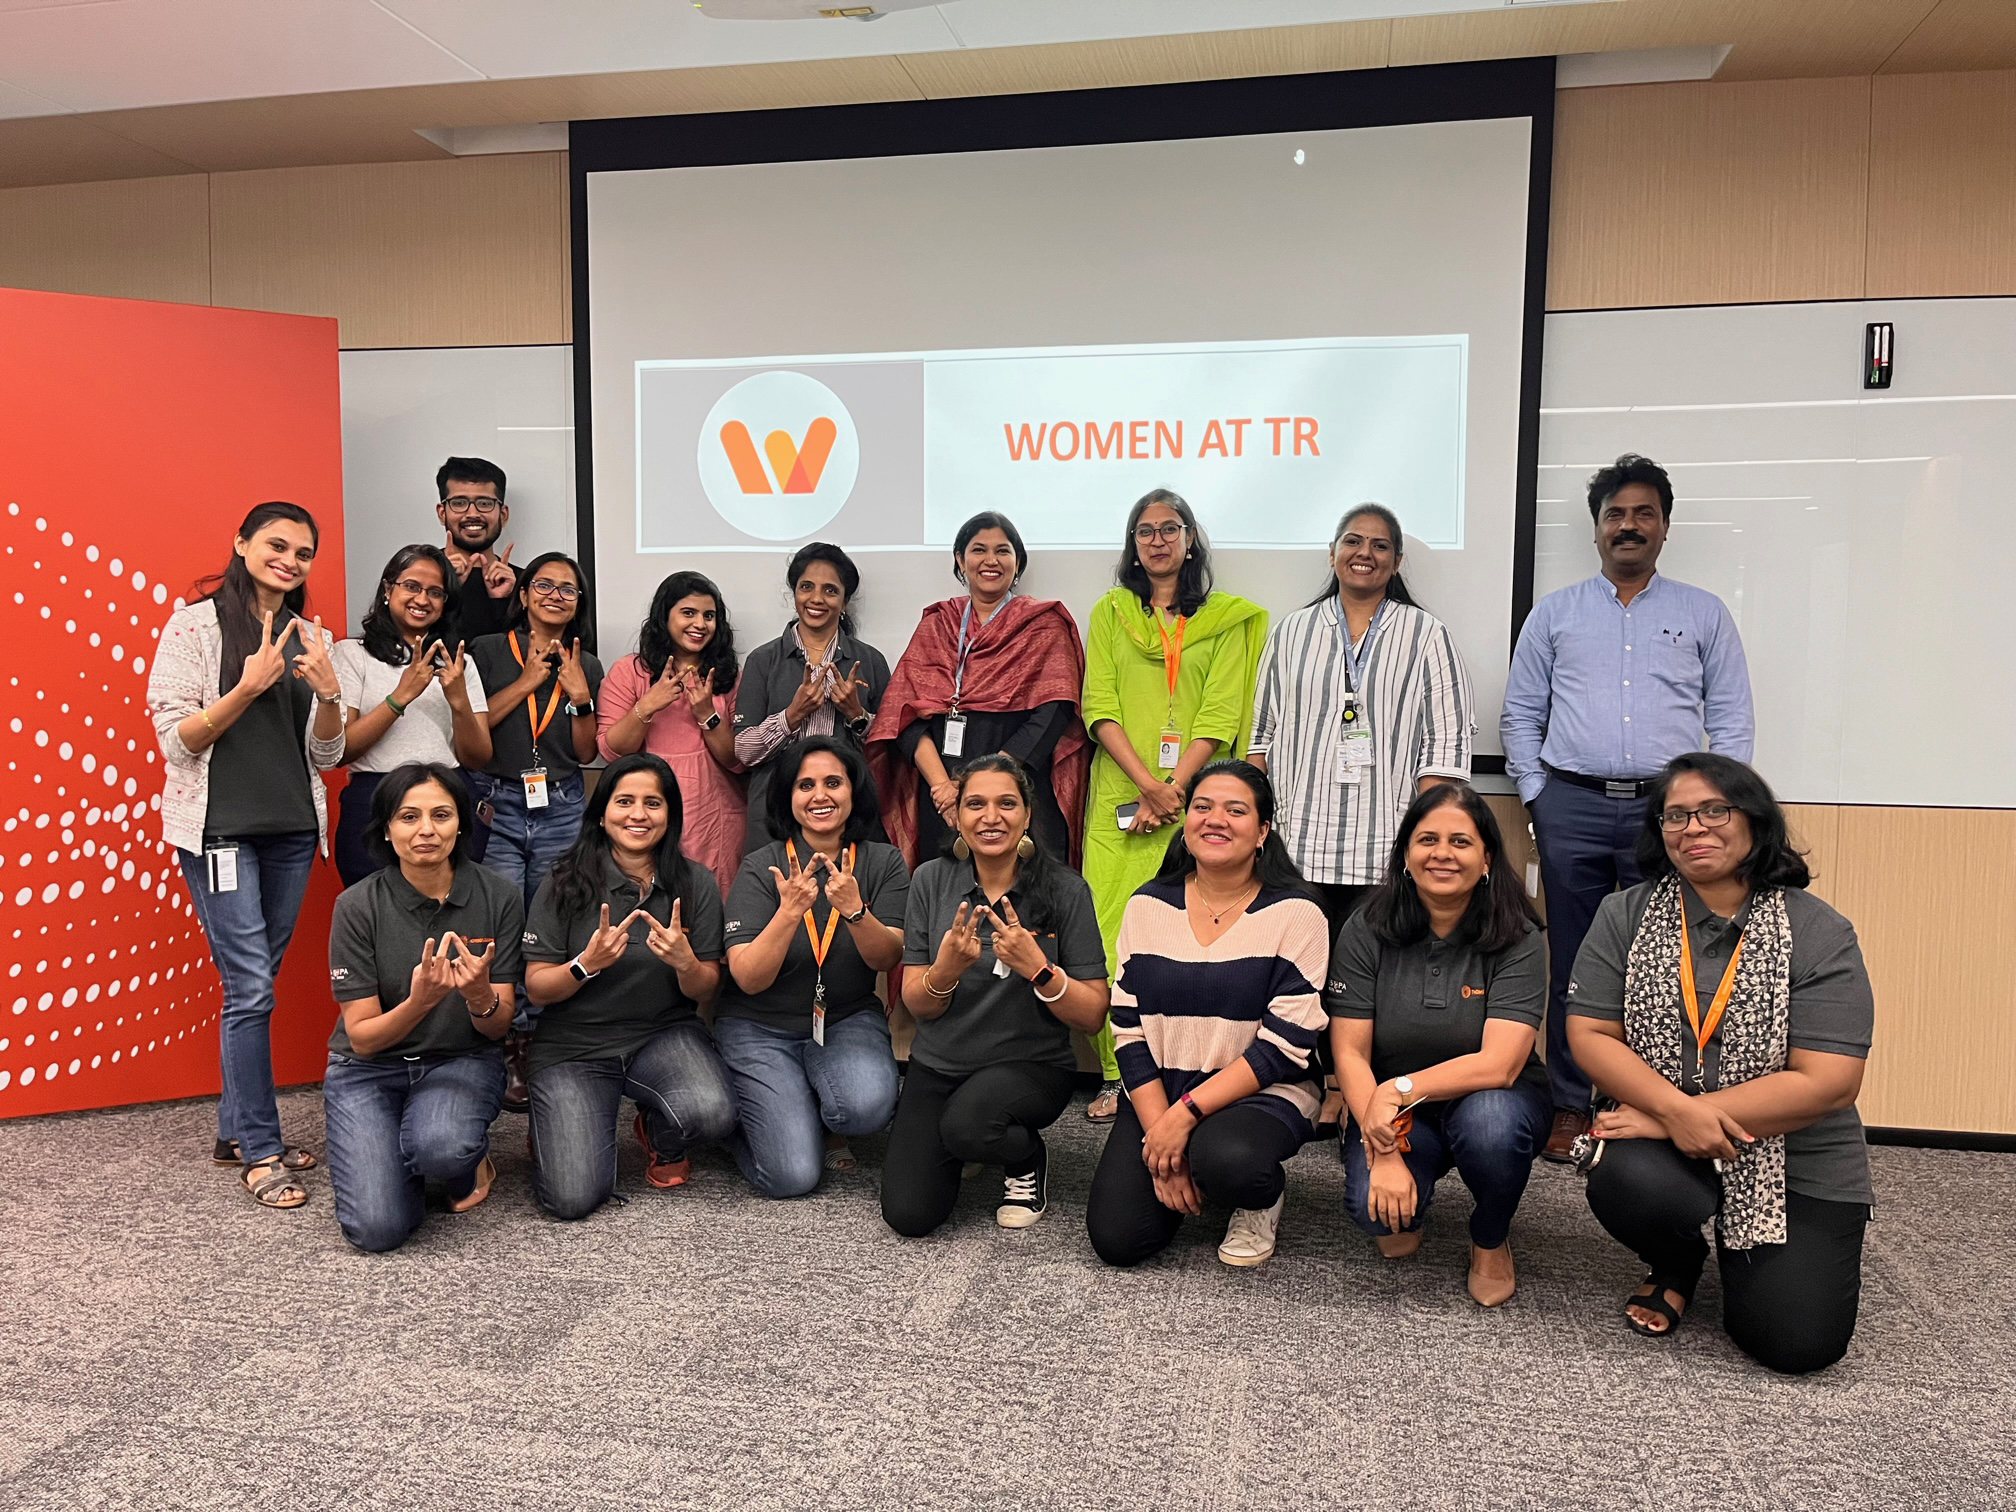 Members of the Women at Thomson Reuters business resource group standing together for a team photo in our India office.